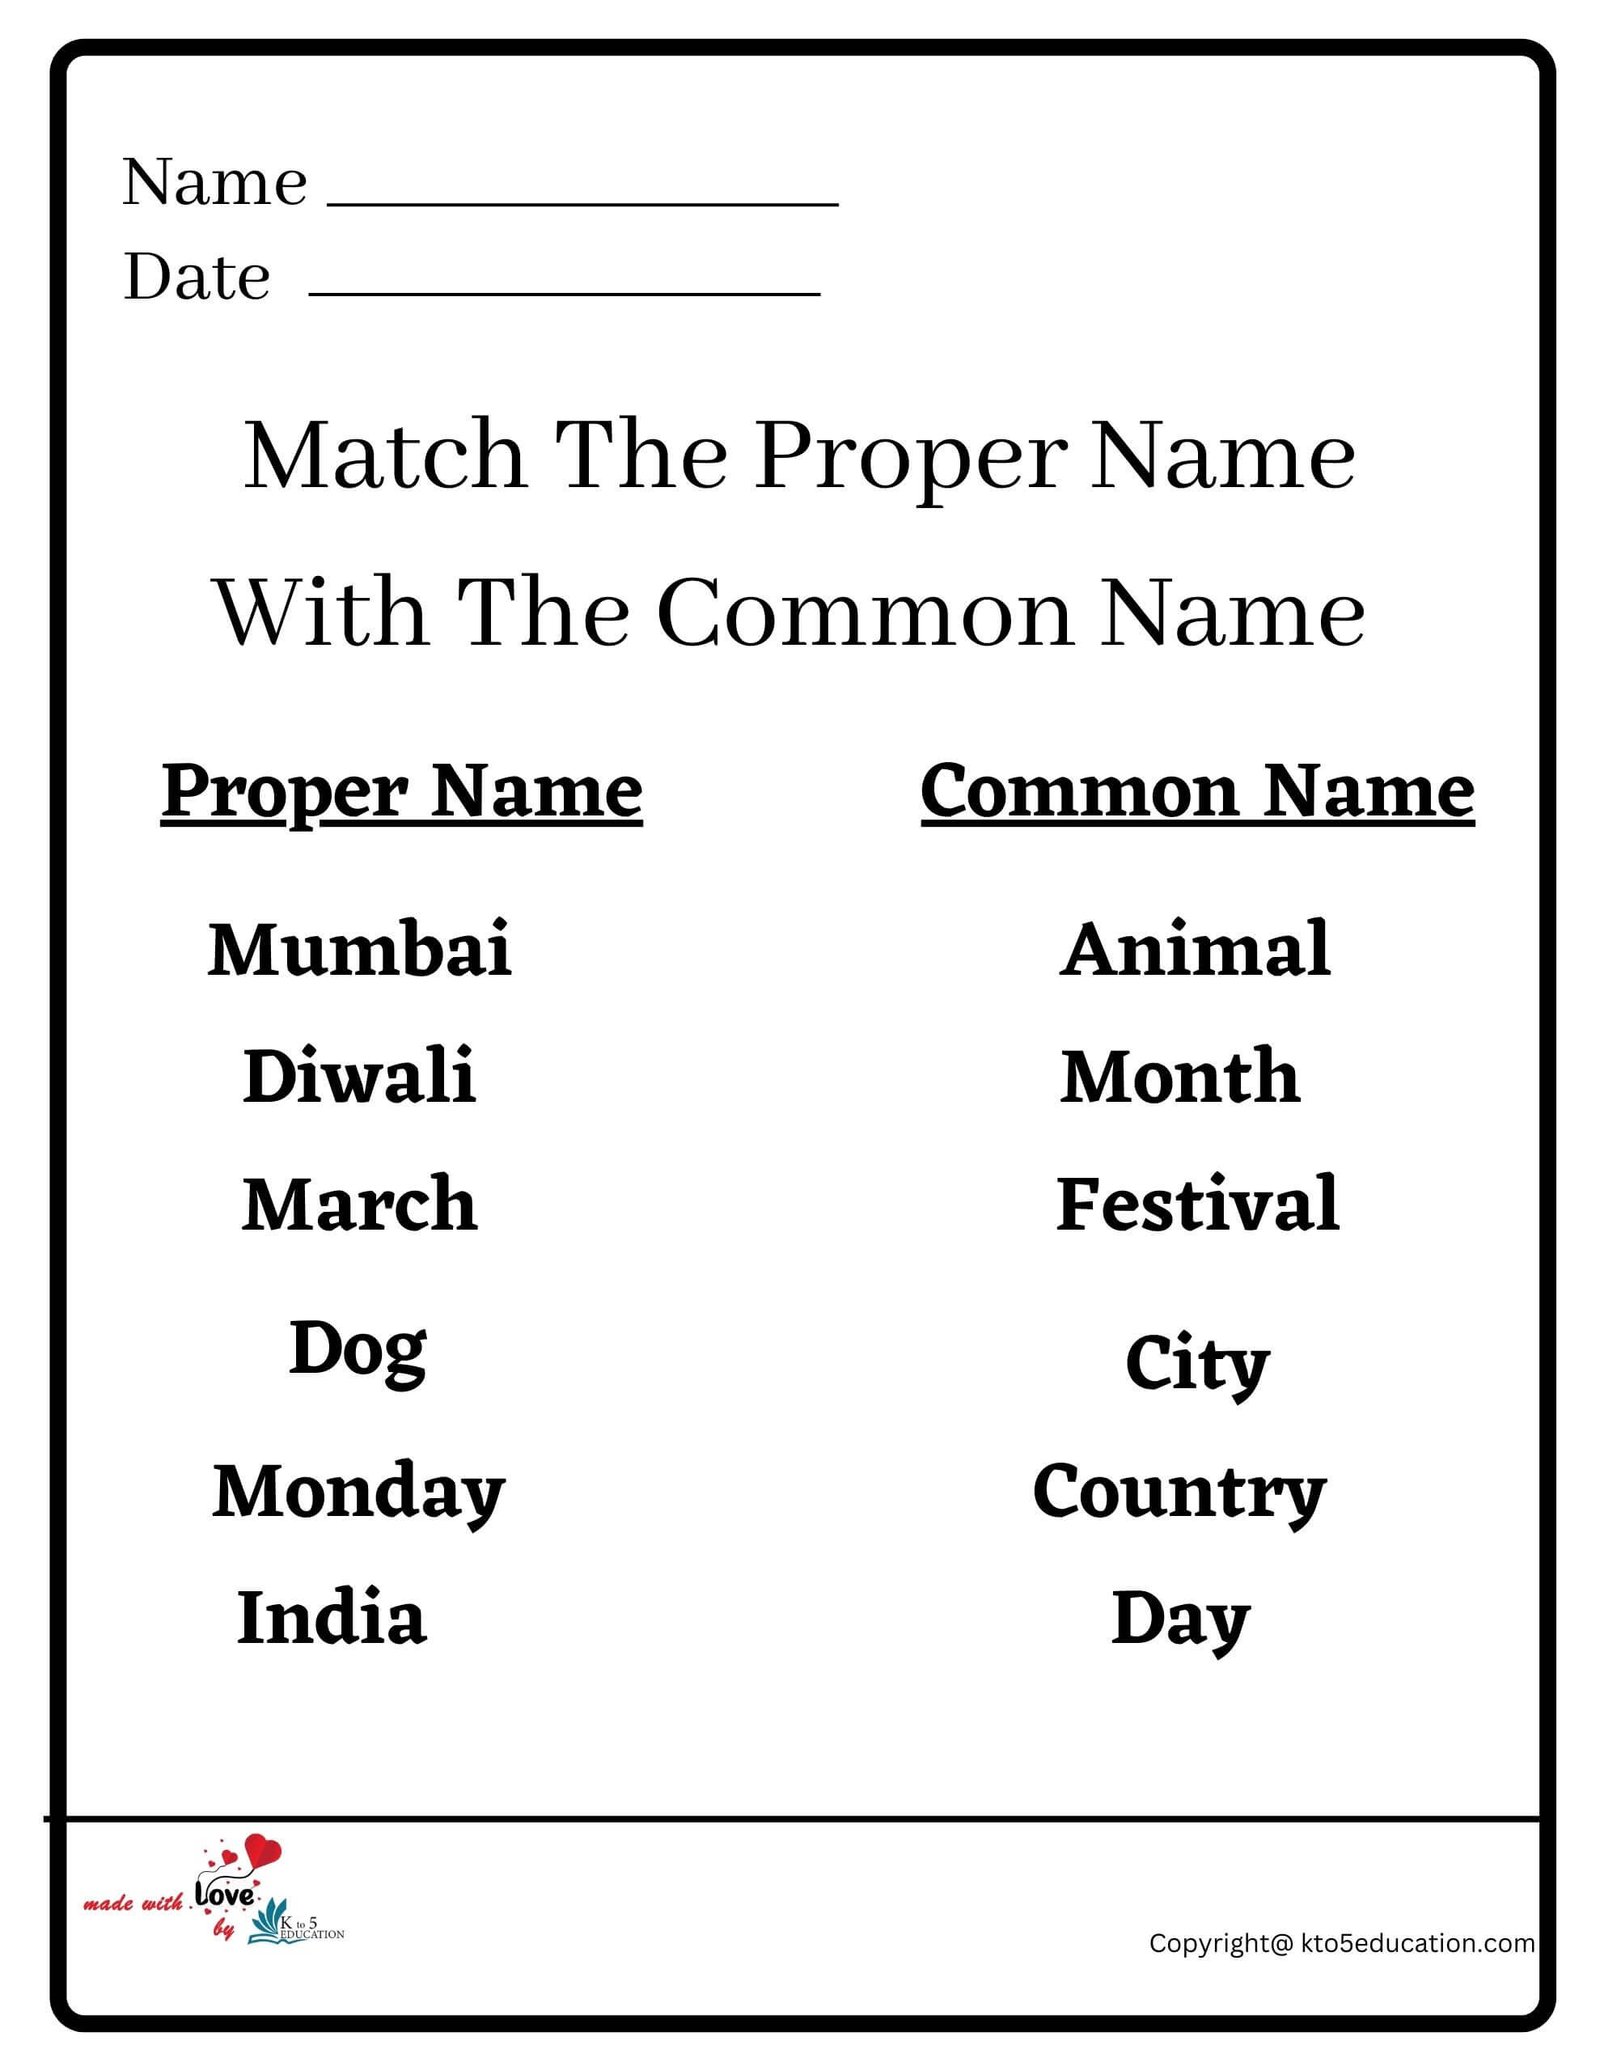 Match The Proper Name With The Common Name Worksheet